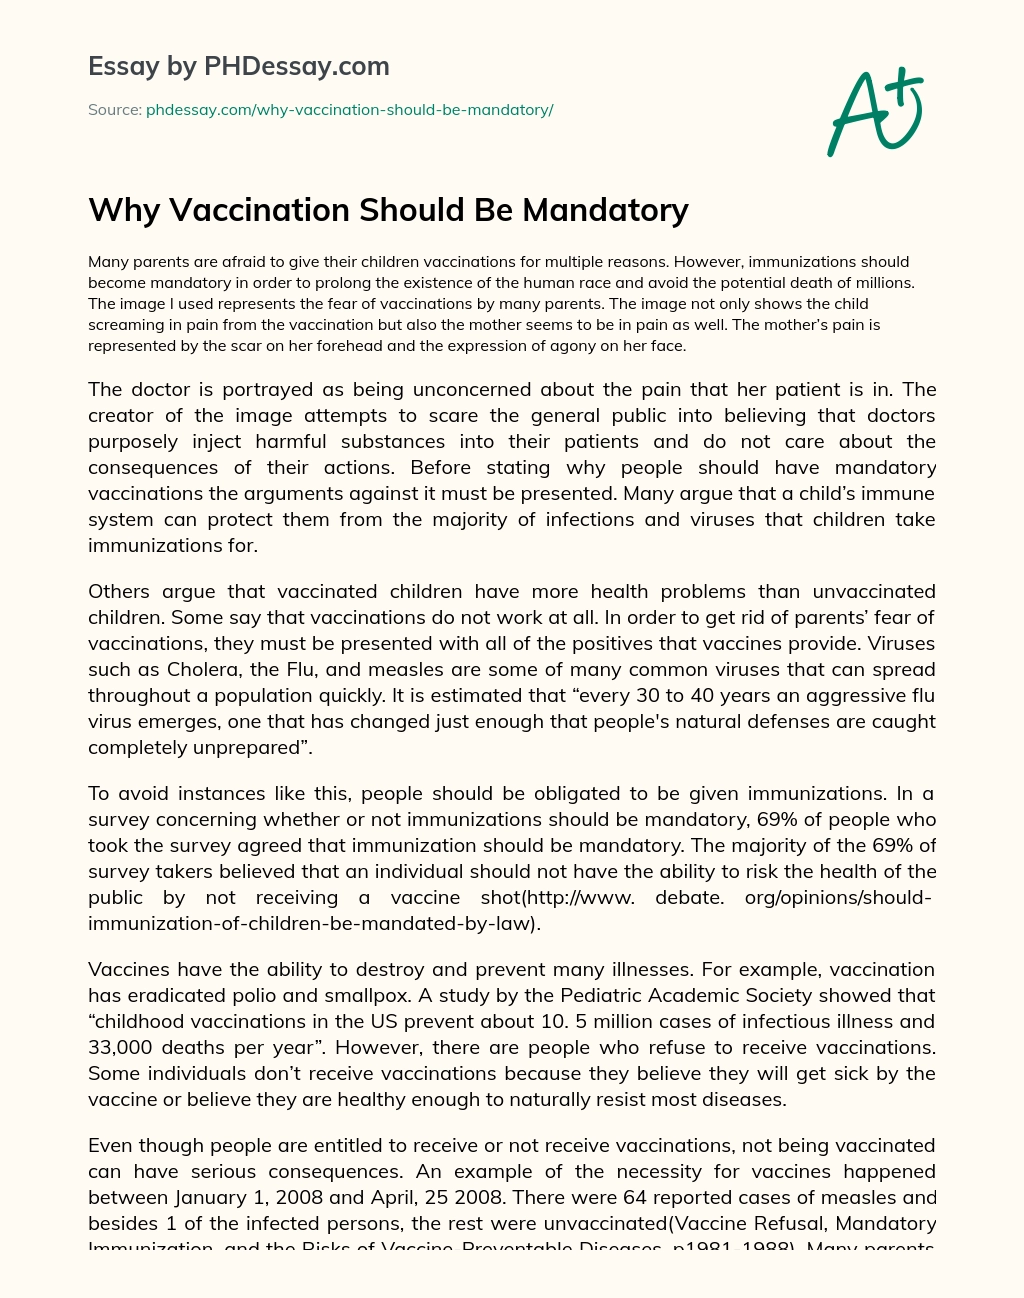 Why Vaccination Should Be Mandatory essay